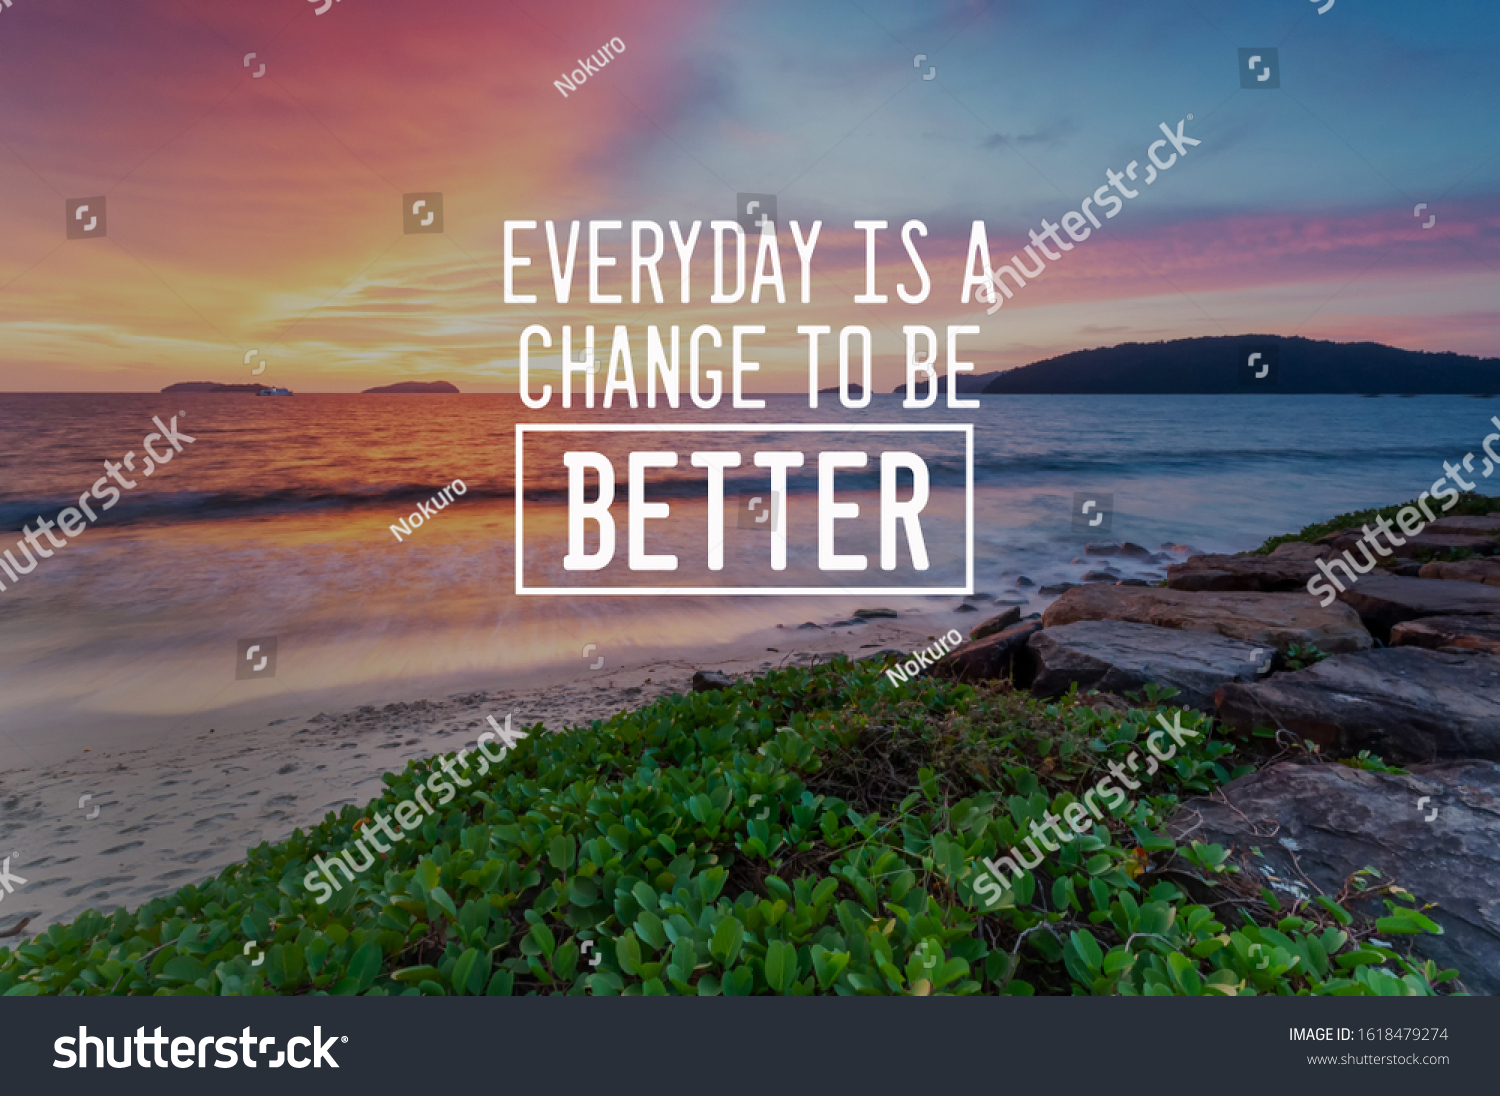 Motivational and inspirational quotes - Everyday is a chance to be better #1618479274